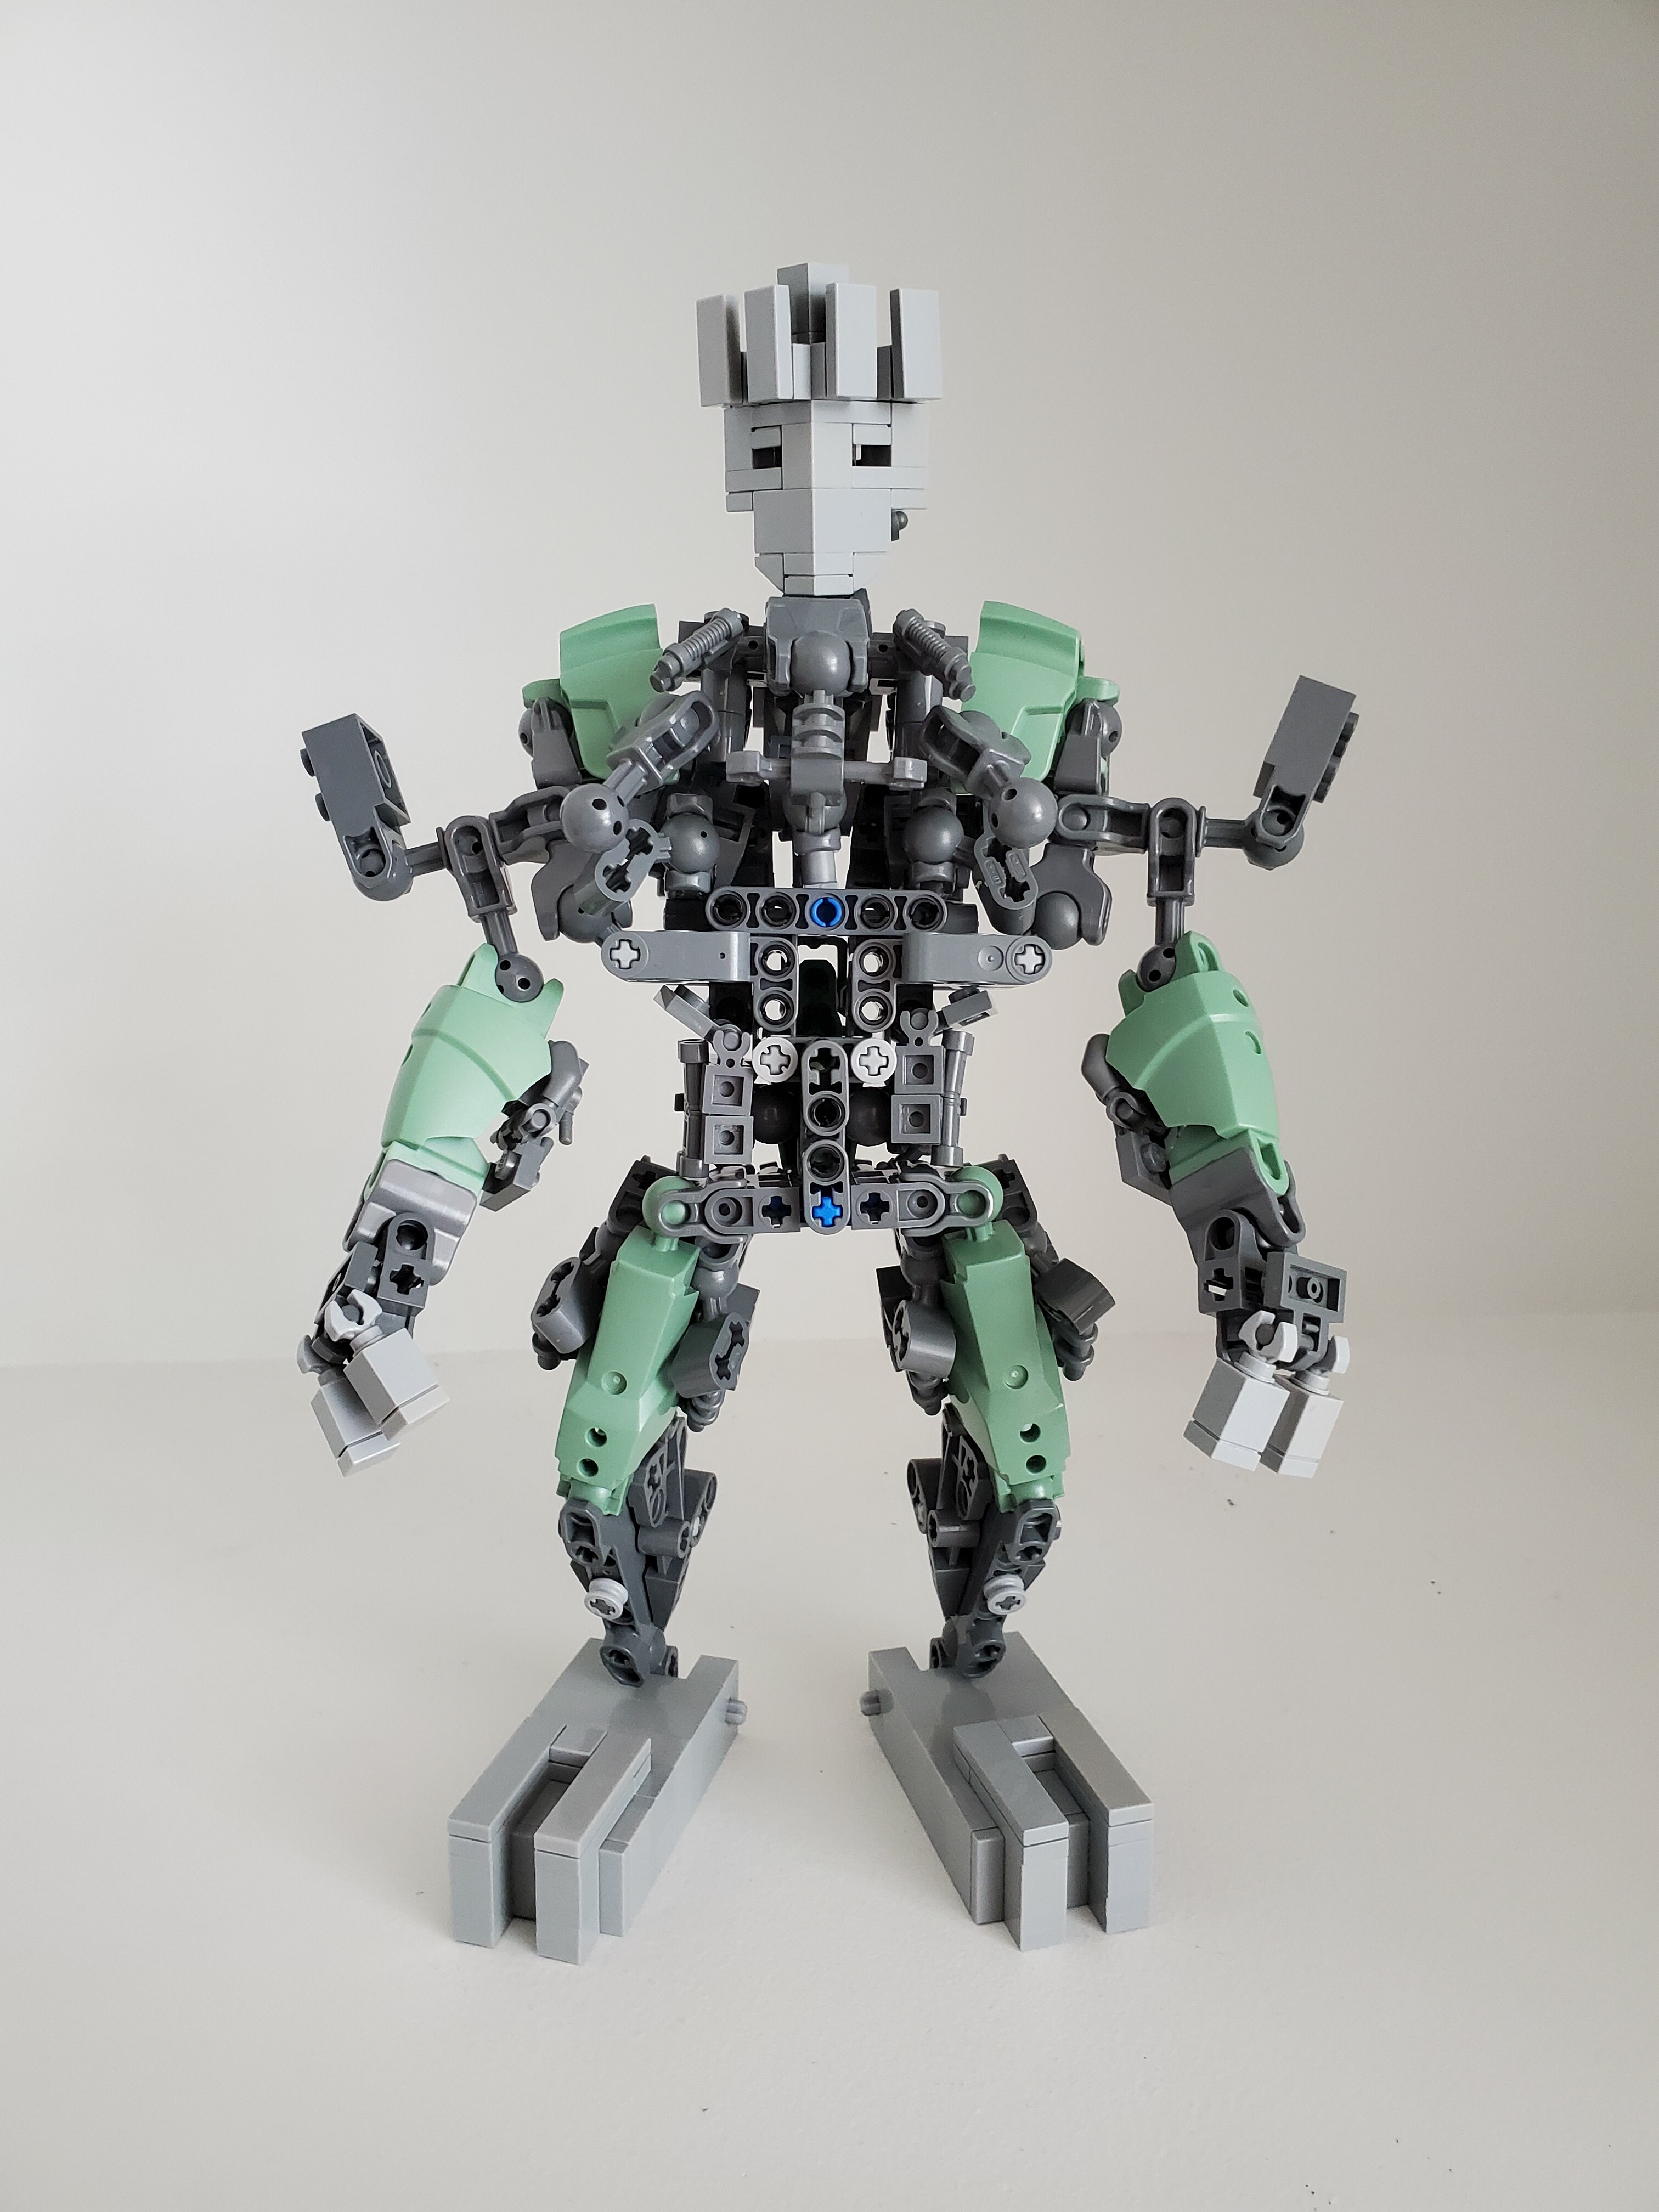 LEGO BIONICLE, LARGE 11 inches in height, Green/Blk/Gray, POSEABLE